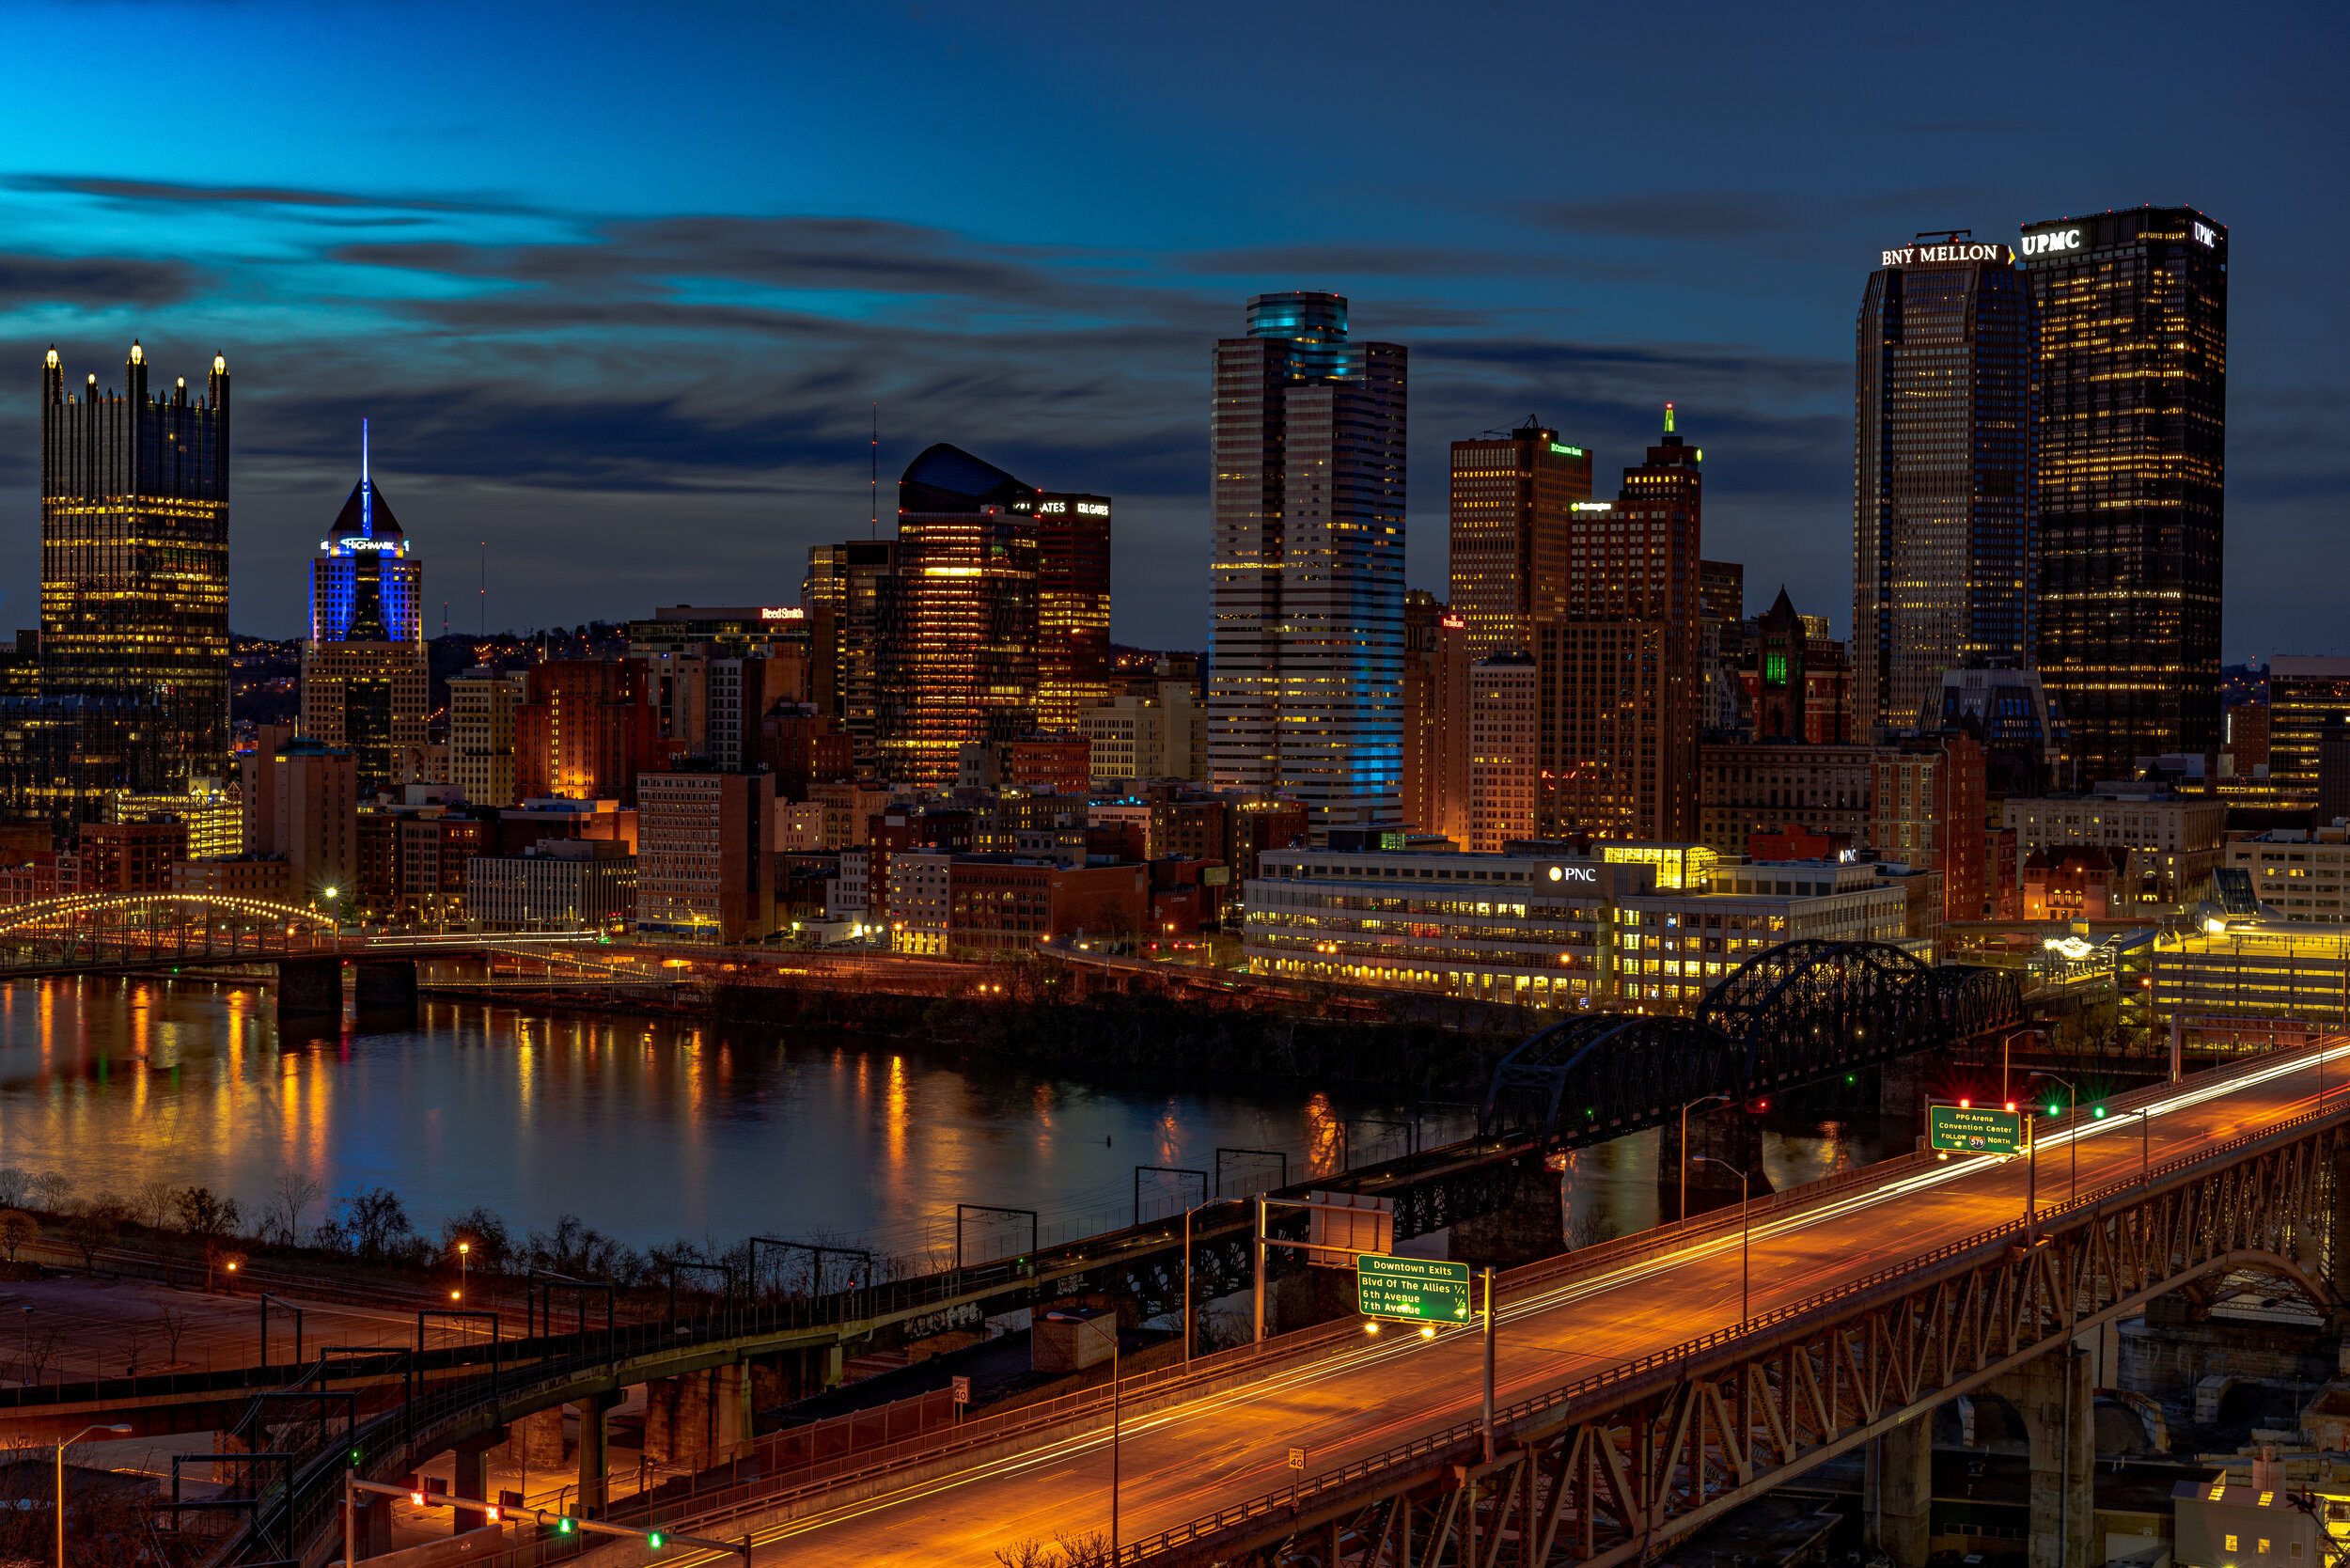 Alex Goff photography, Pittsburgh through the lens, Capturing moments, Visual storytelling, 2500x1670 HD Desktop